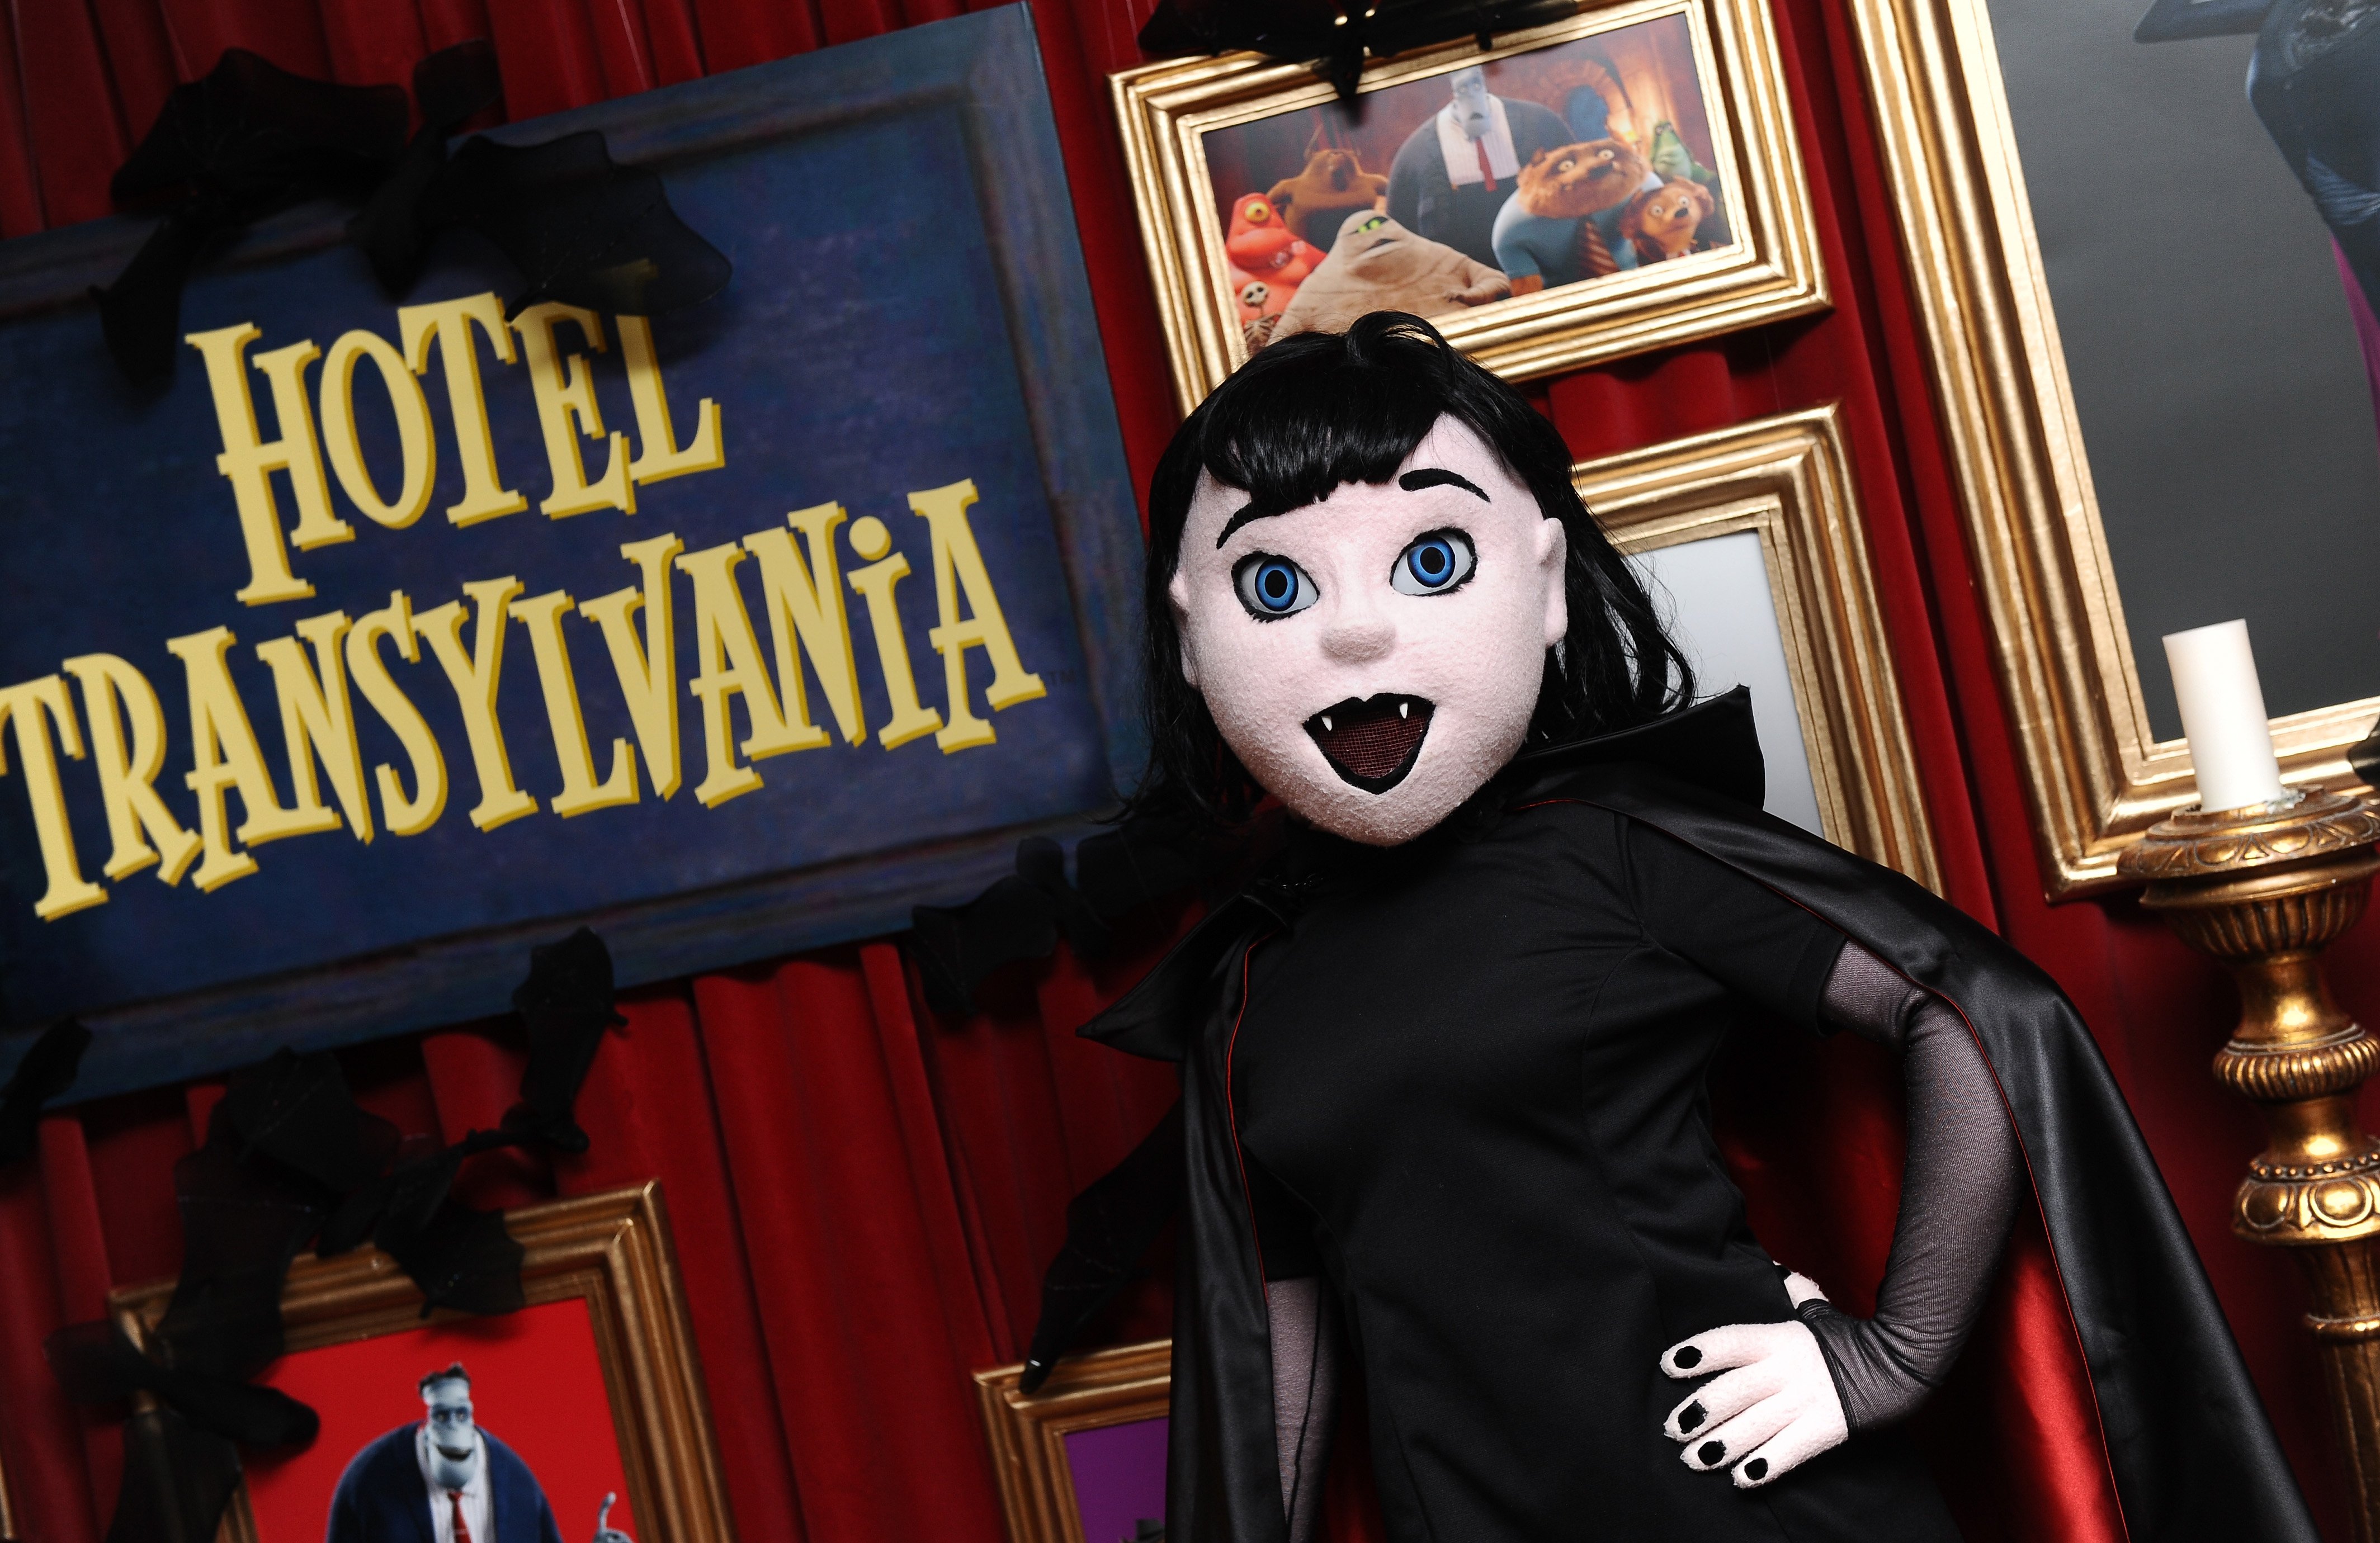 ‘Hotel Transylvania’: Where to Watch All the Movies